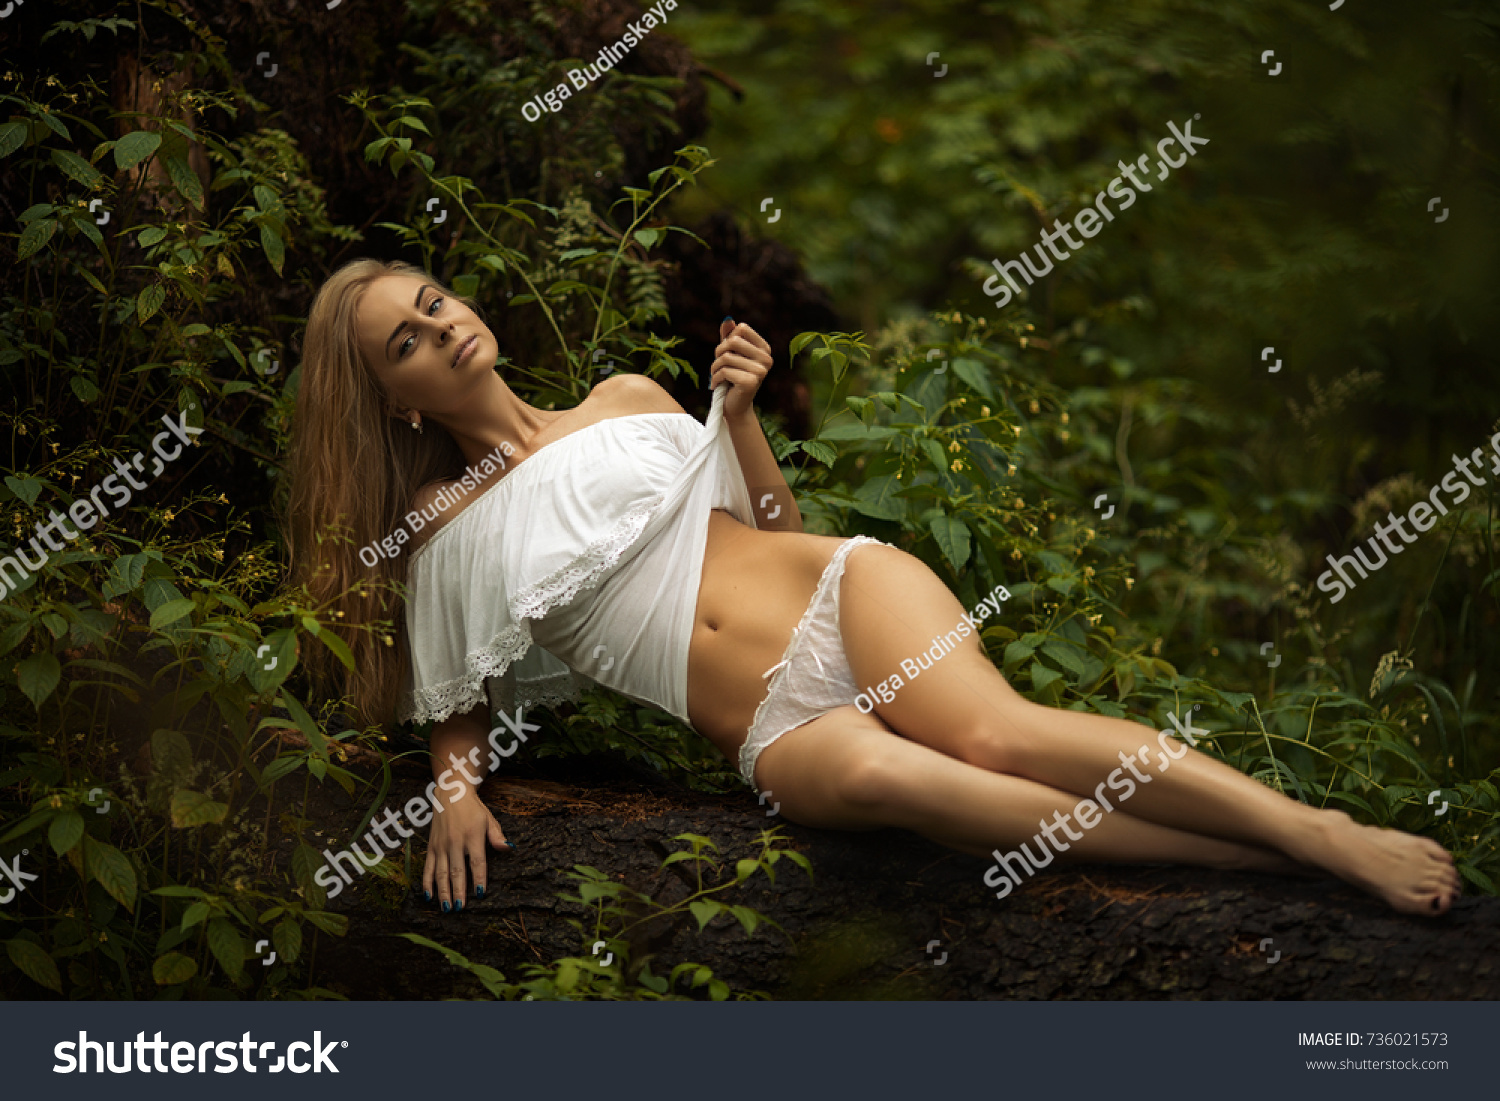 Naked Girl In Nature